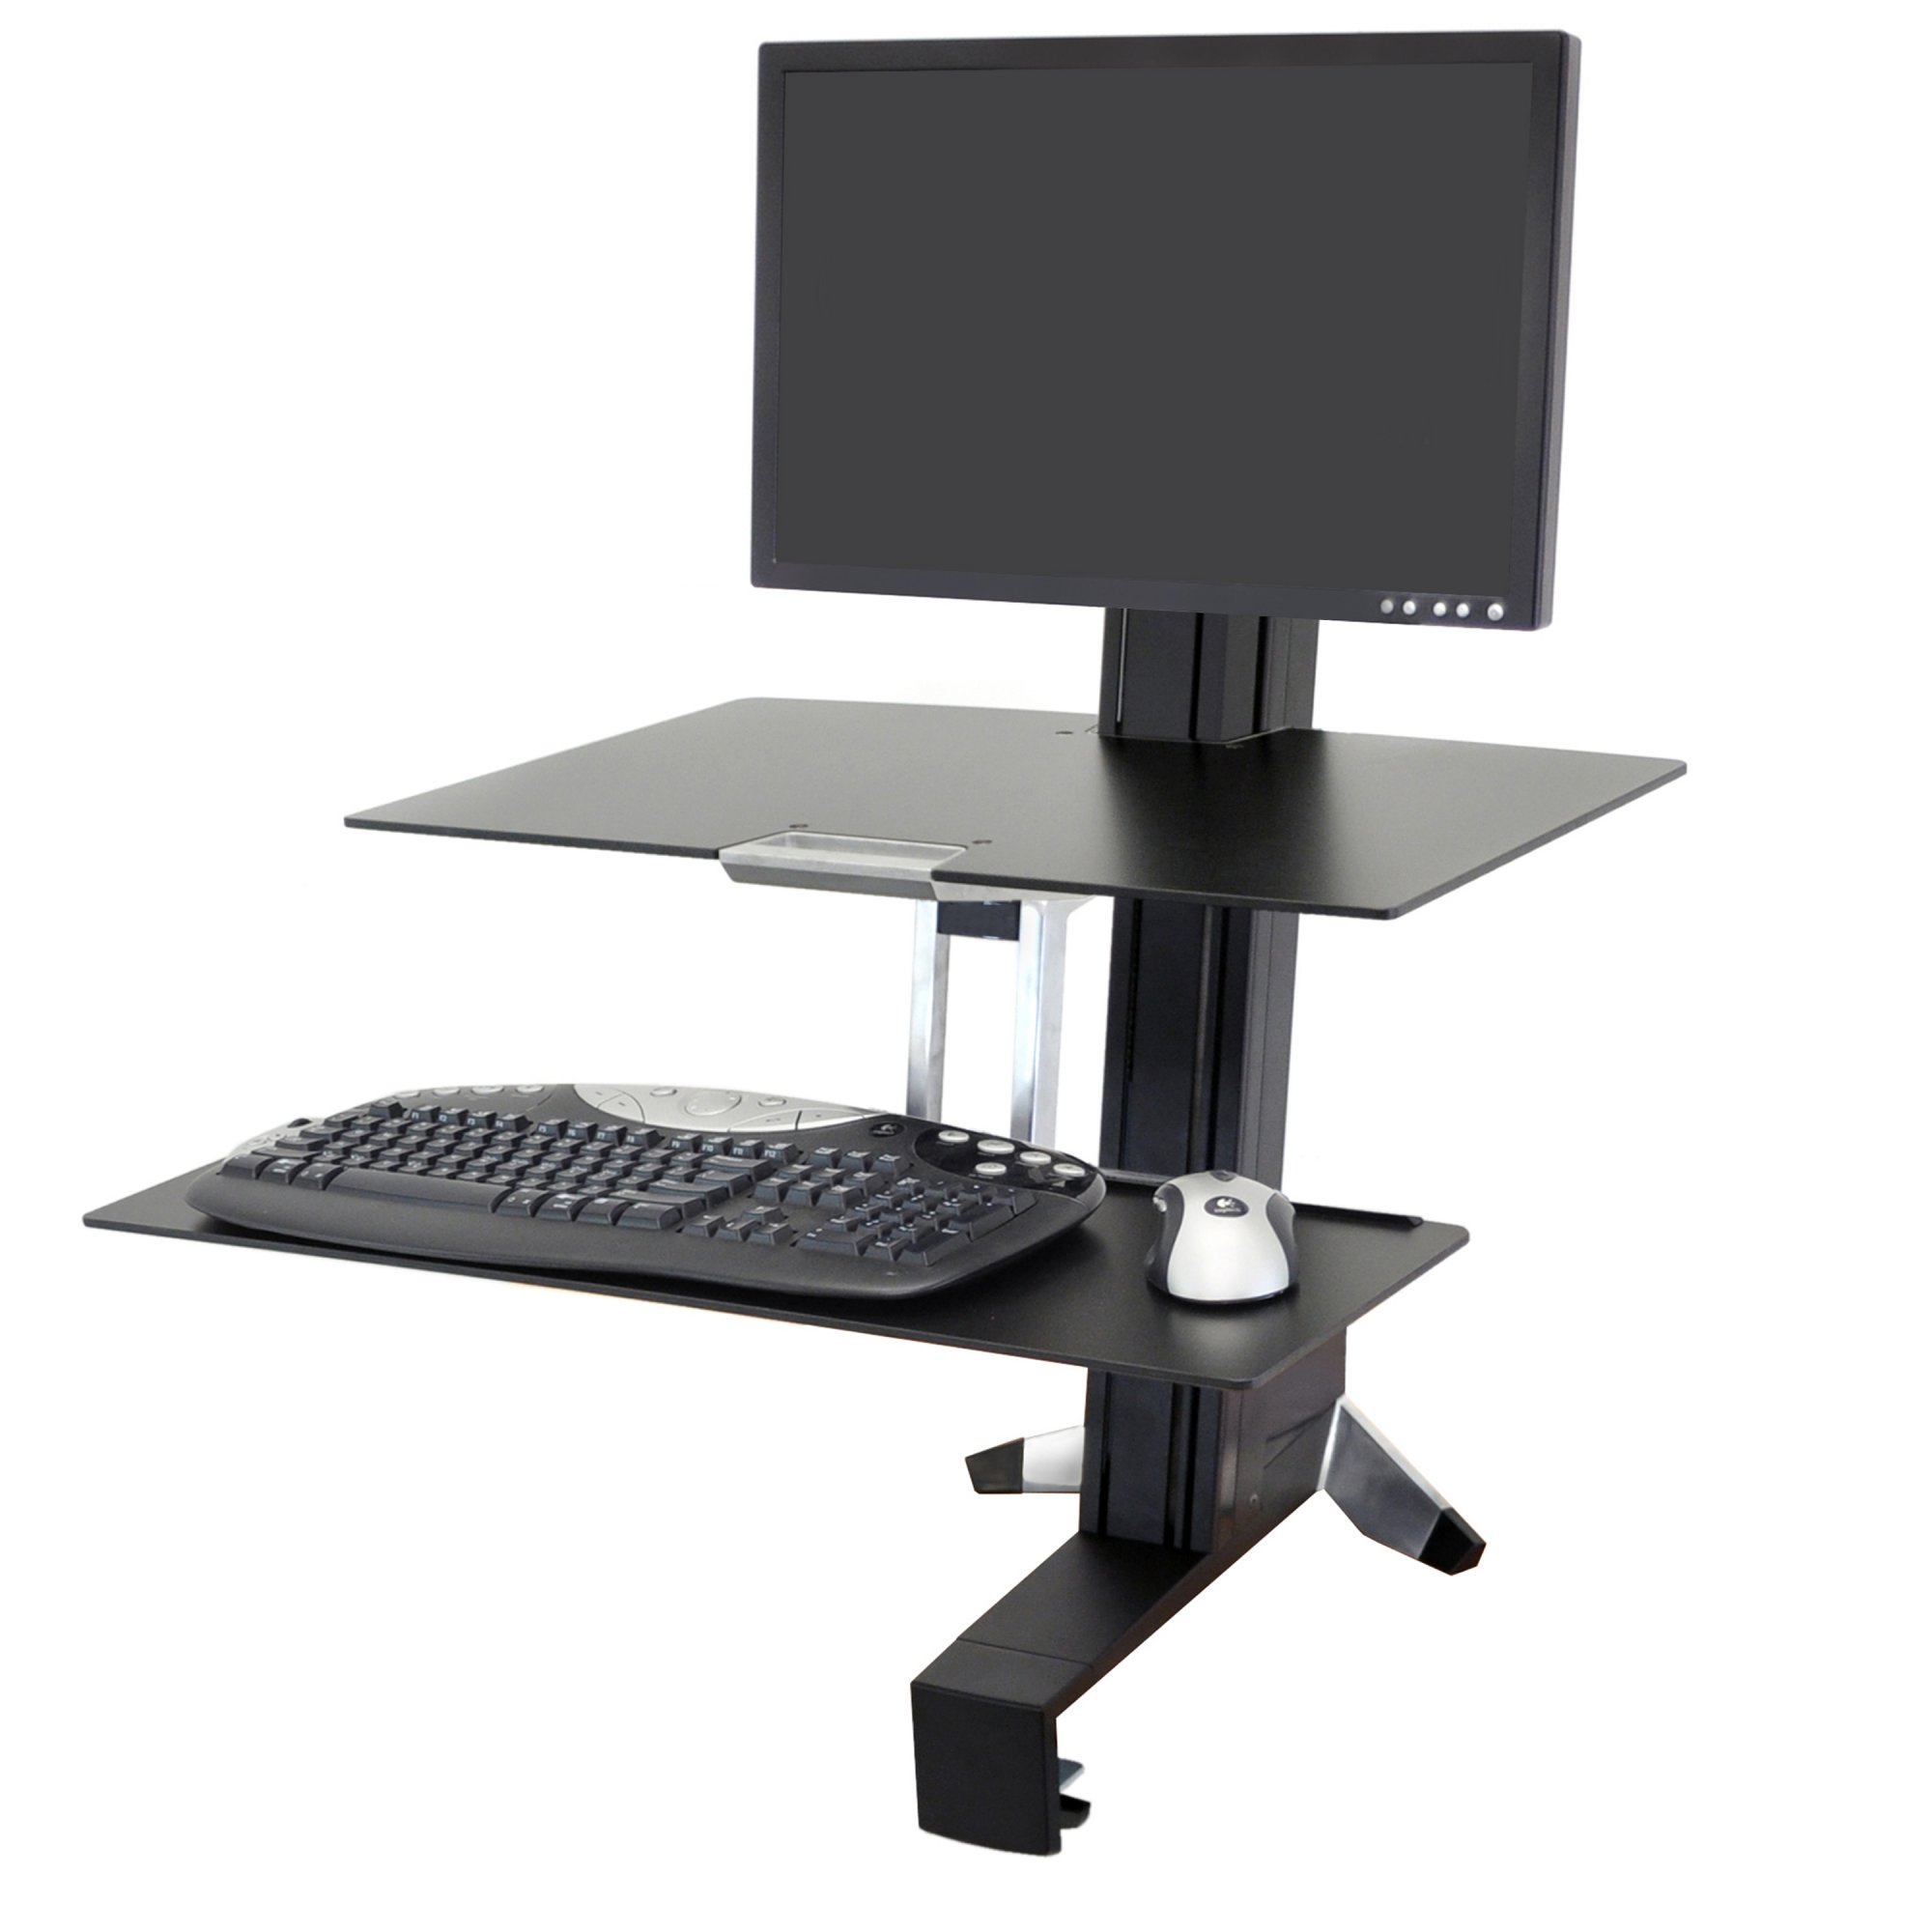 Ergotron 33-351-200 WorkFit-S, Single HD with Worksurface